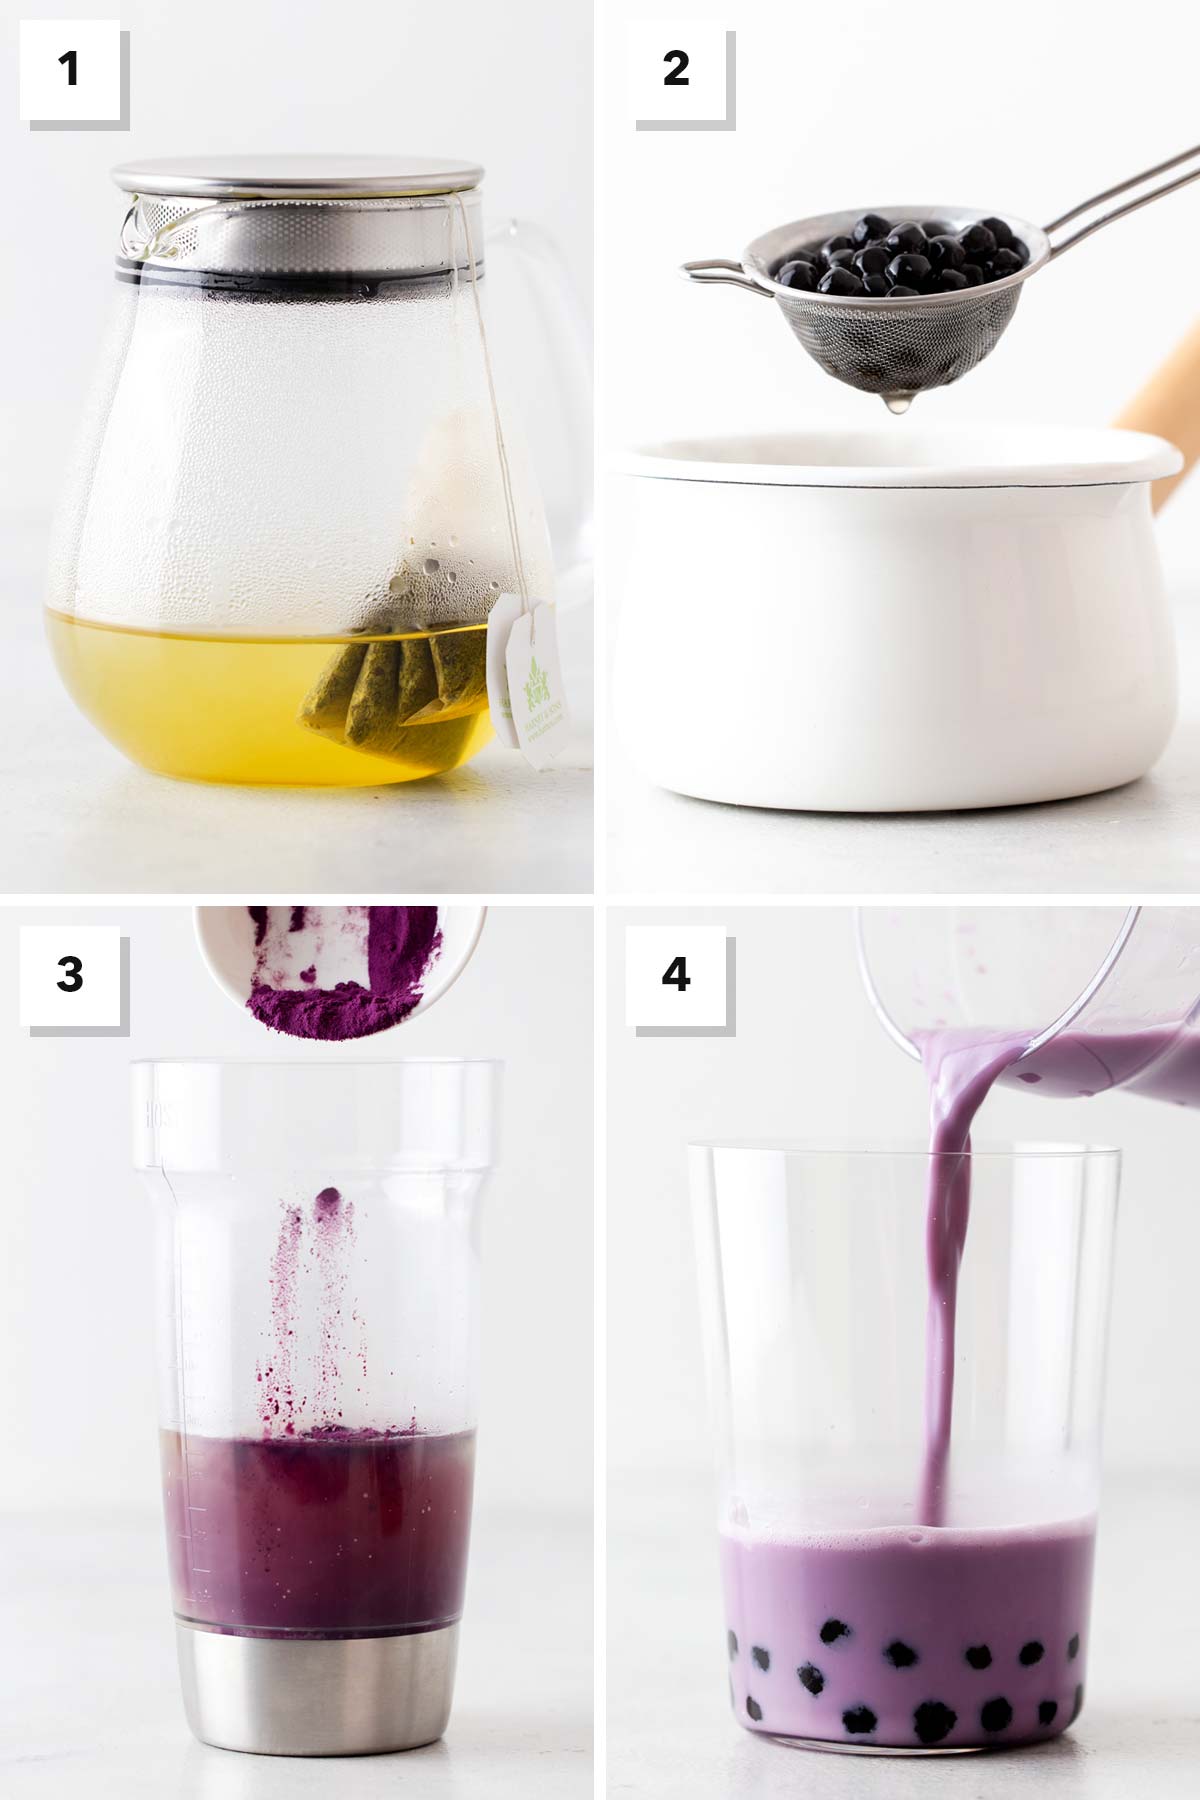 Easy Taro Milk Bubble Tea step-by-step instructions with 4 photos.